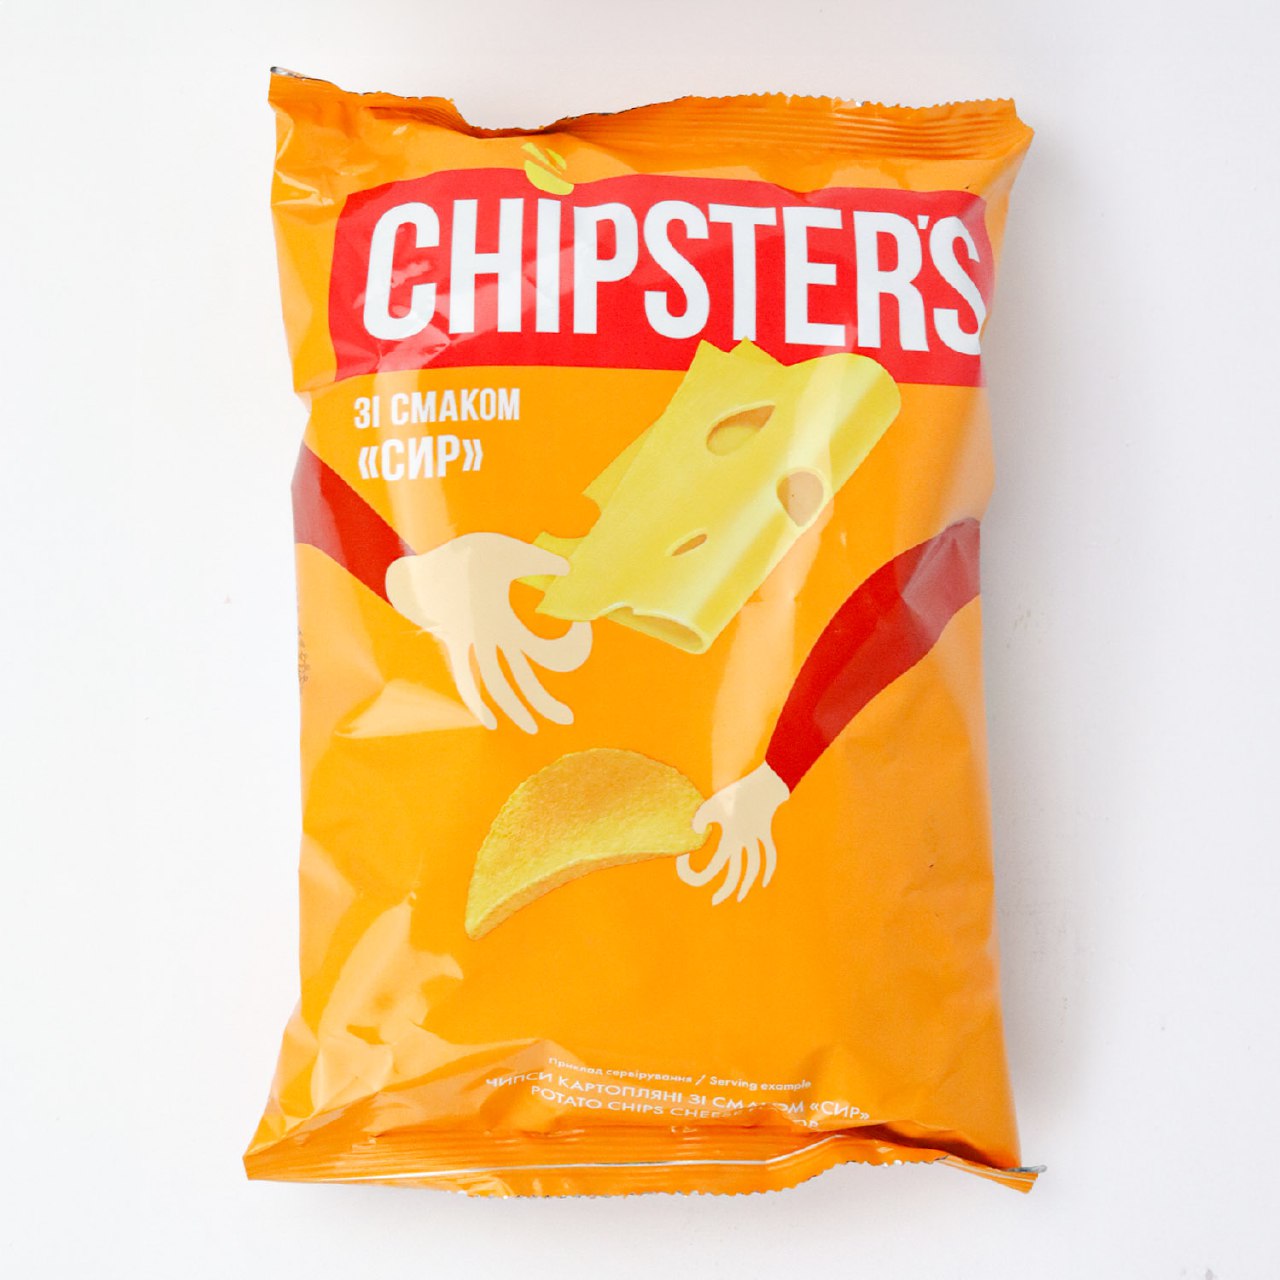 Potato chips with “Cheese” flavor